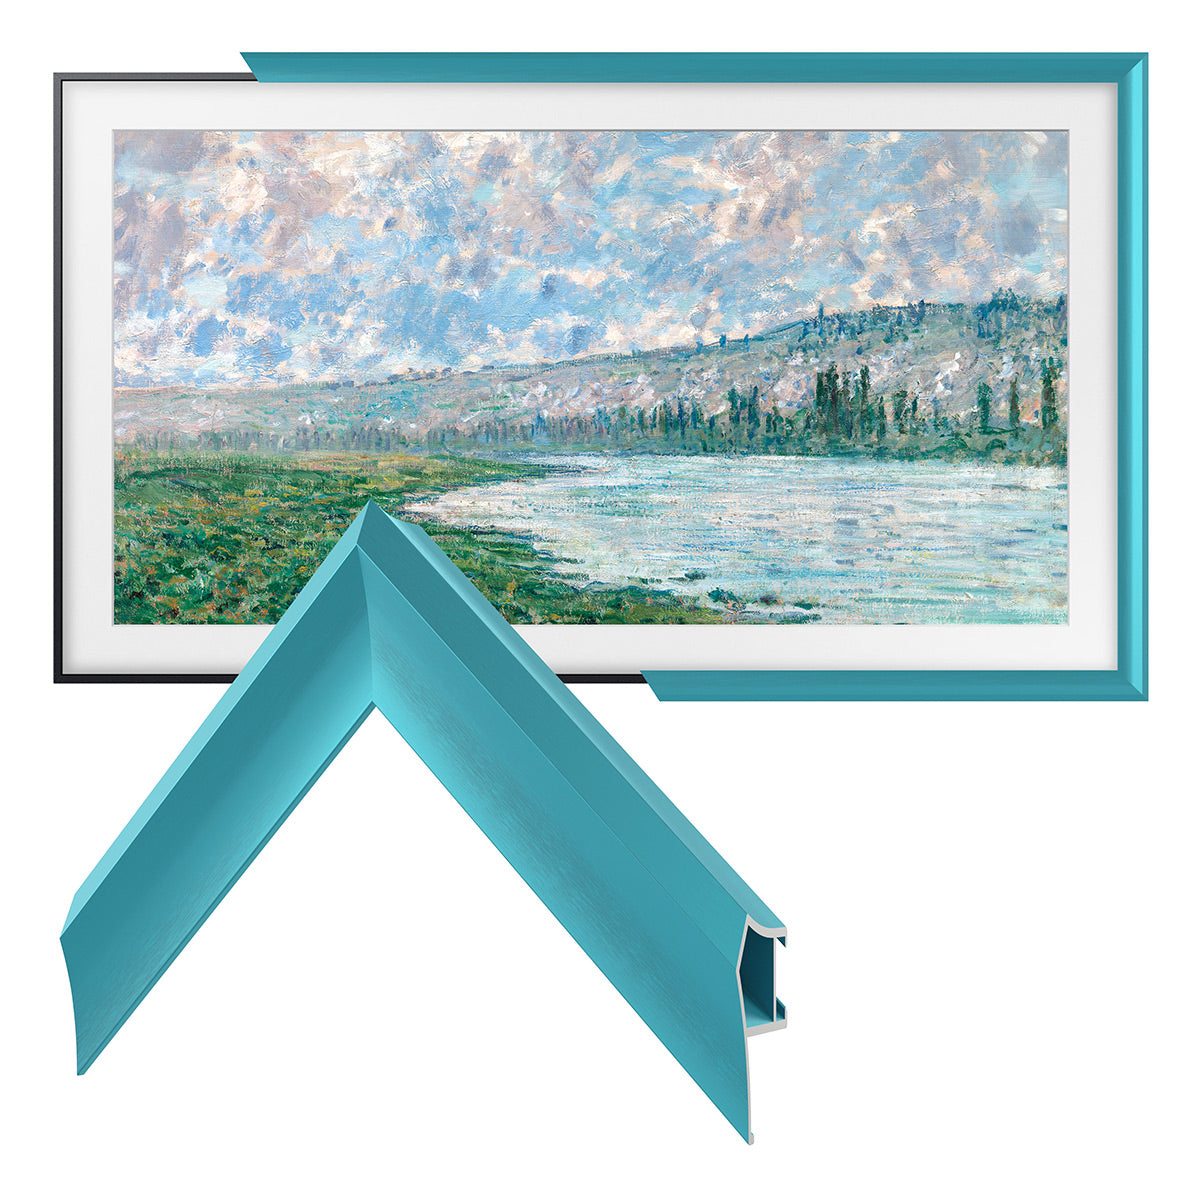 Deco TV Frames 43" Customizable Alloy Prismatic Frame for Samsung The Frame TV 2021-2024 (Turquoise)